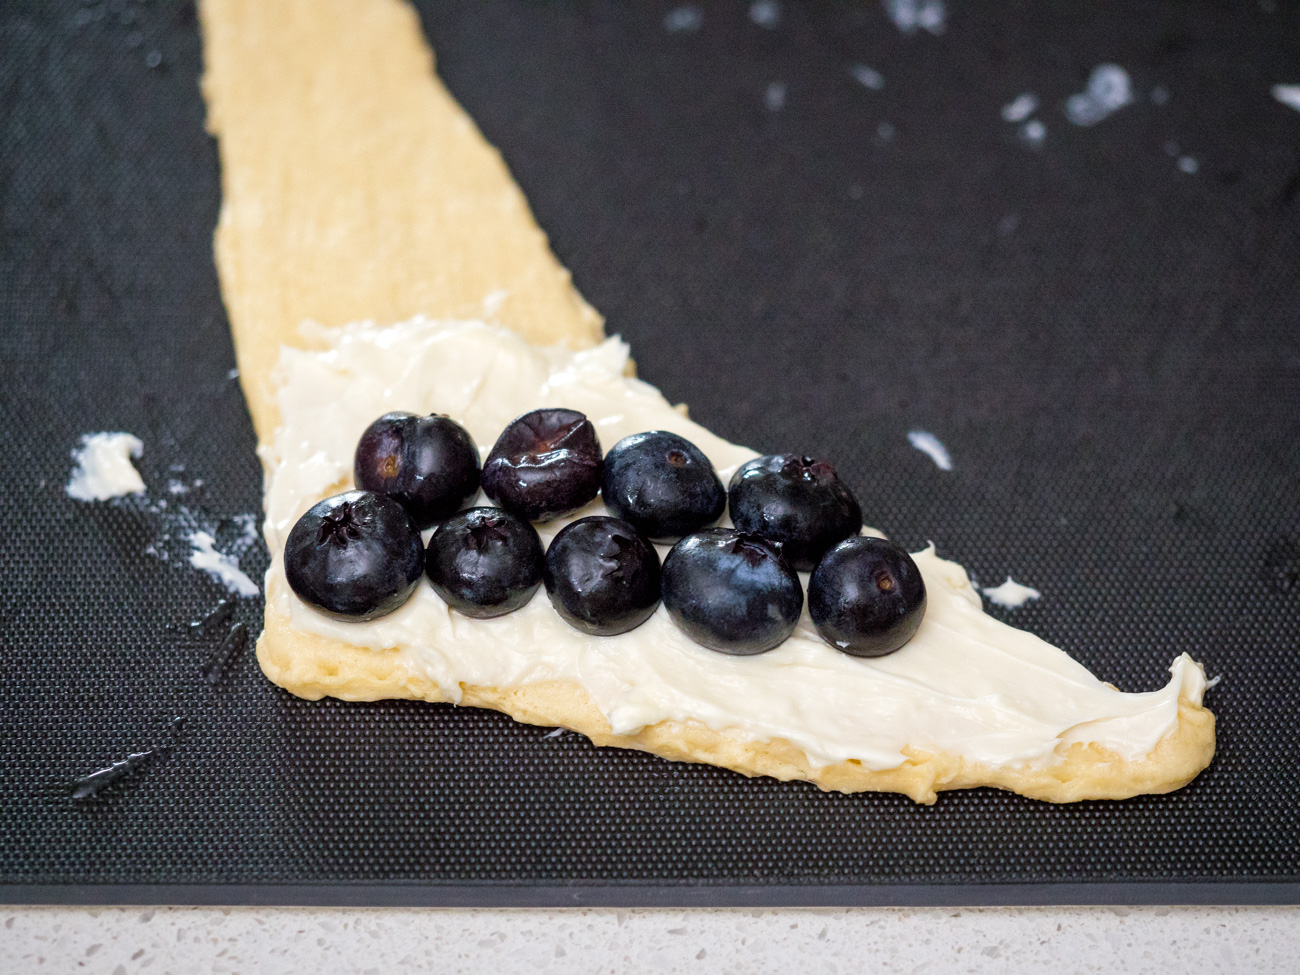 Separate canned crescent rolls into 8 triangles along the perforated seams. Place a triangle of dough on a clean, flat surface, with the short, wide end facing you and the long triangle pointing away. Spread a tablespoon of cream cheese mixture across the bottom third of the dough triangle. Top the cream cheese with two rows of blueberries.